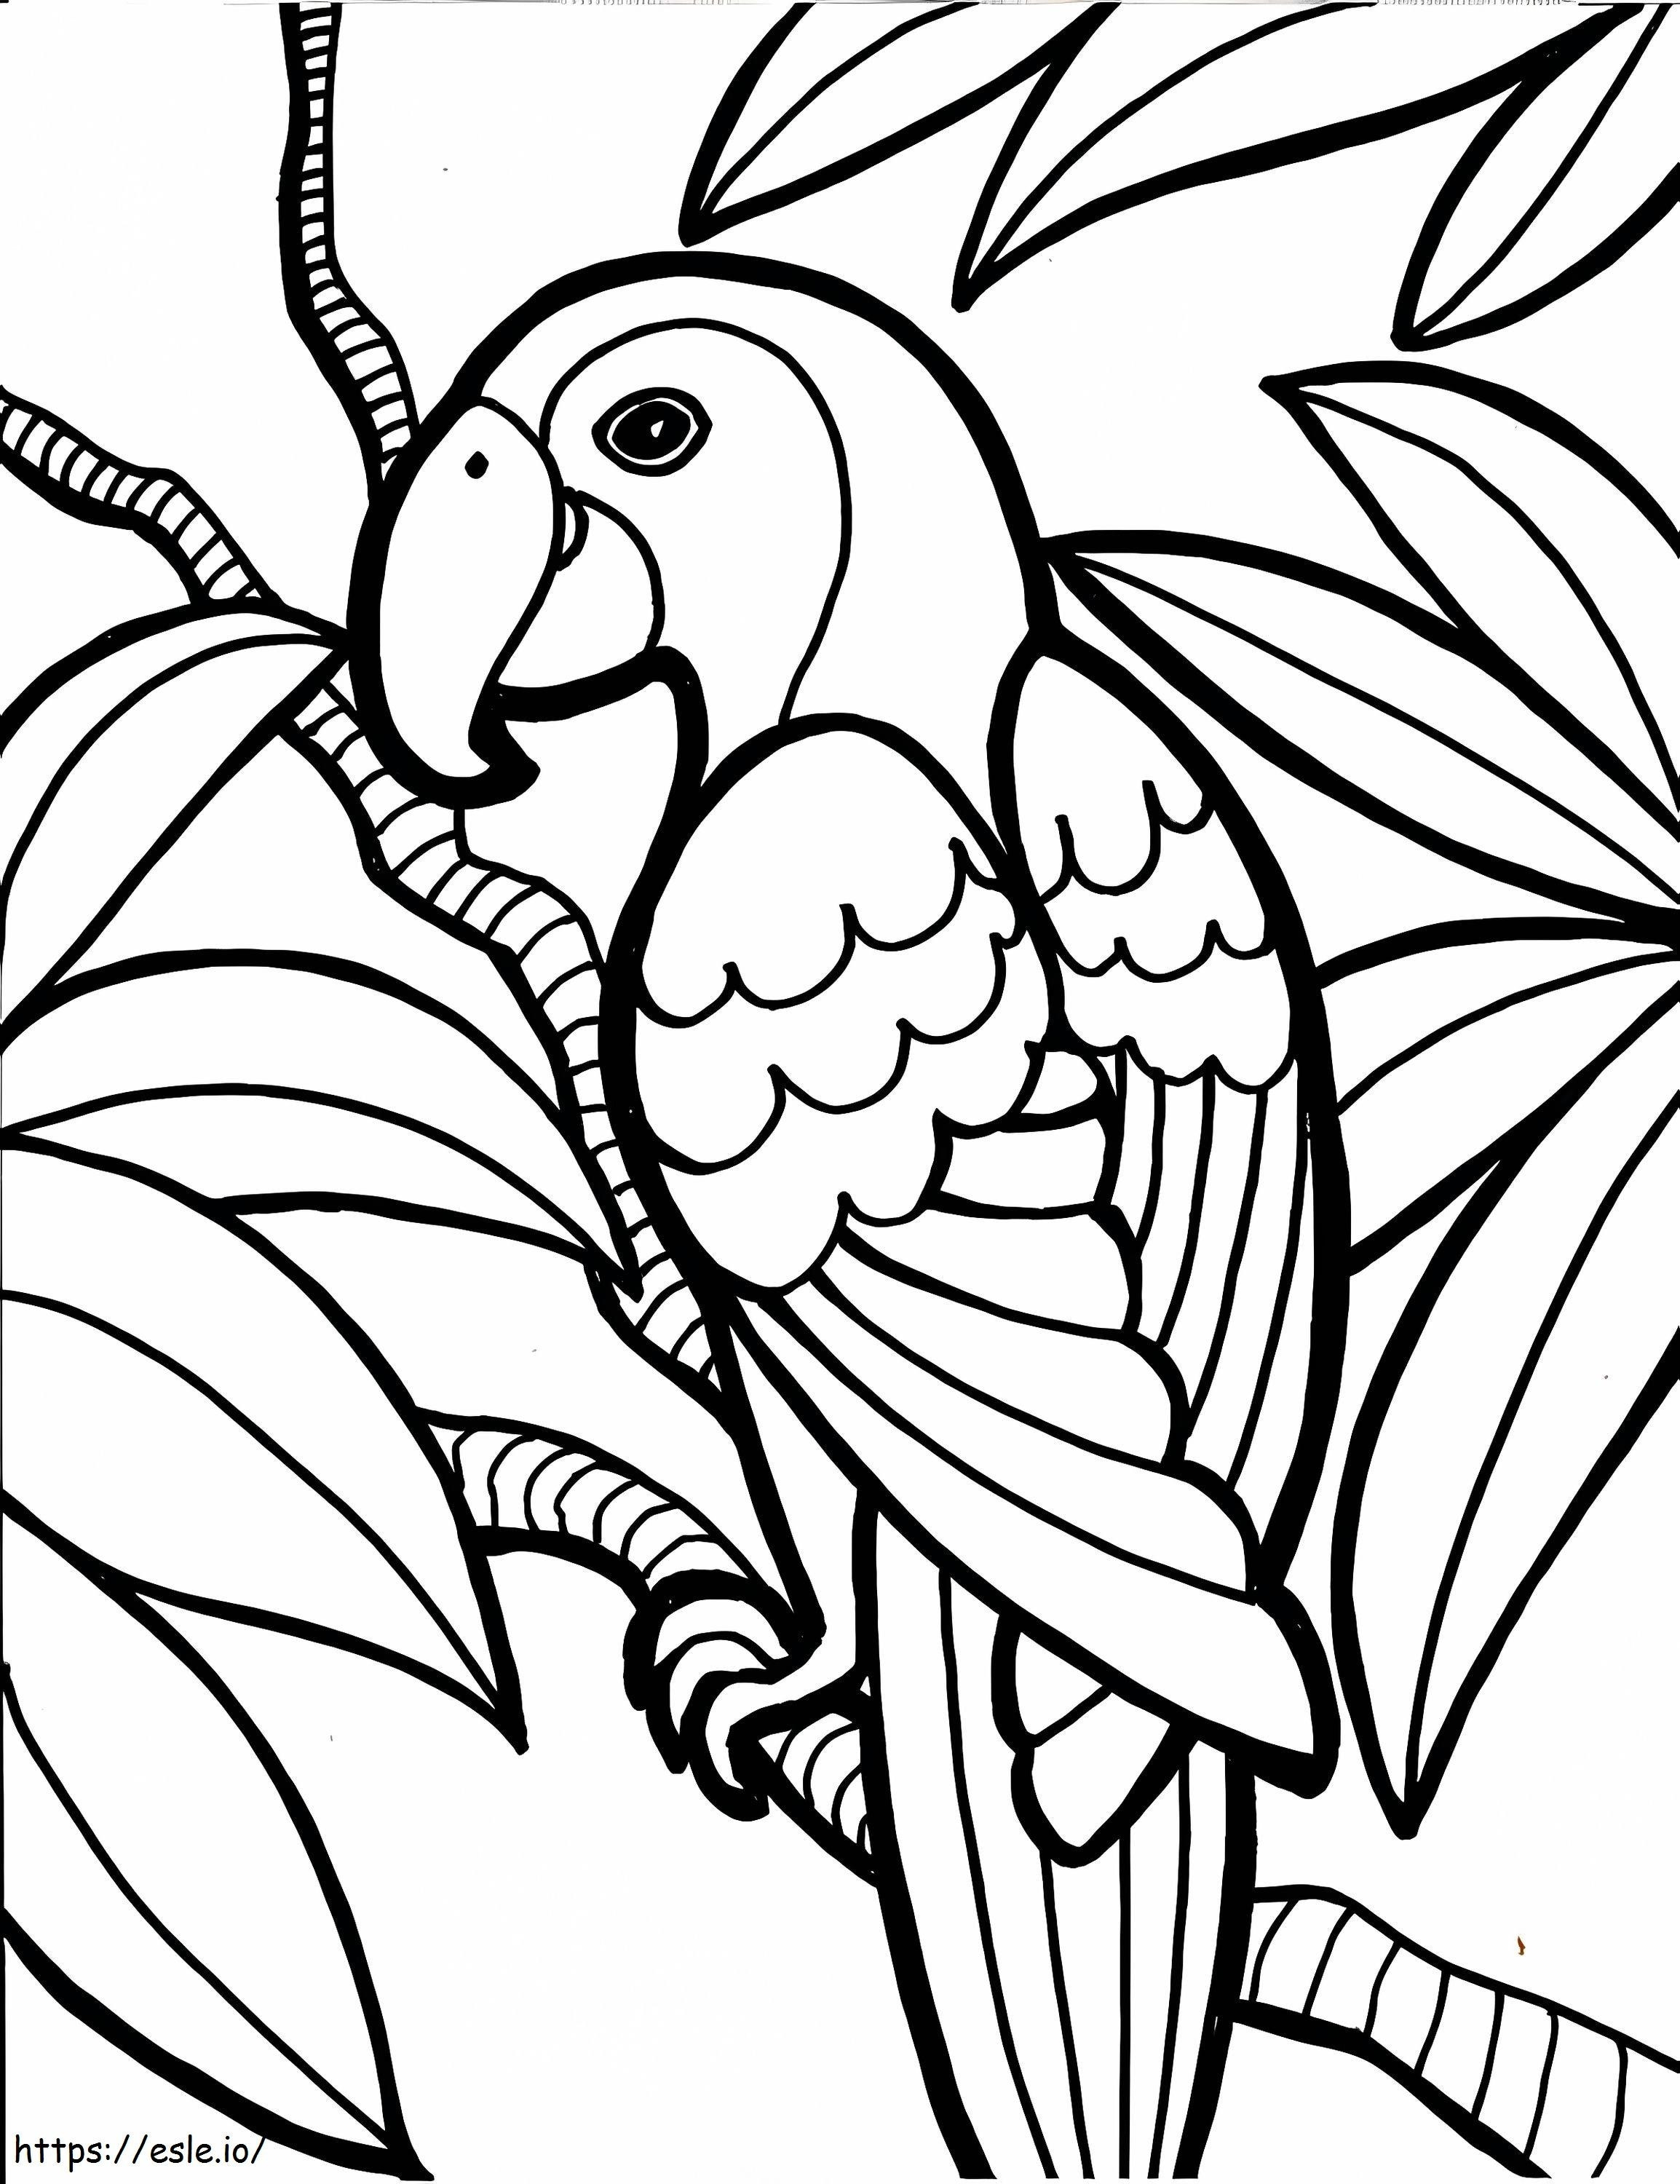 Parrot Is For Adults coloring page